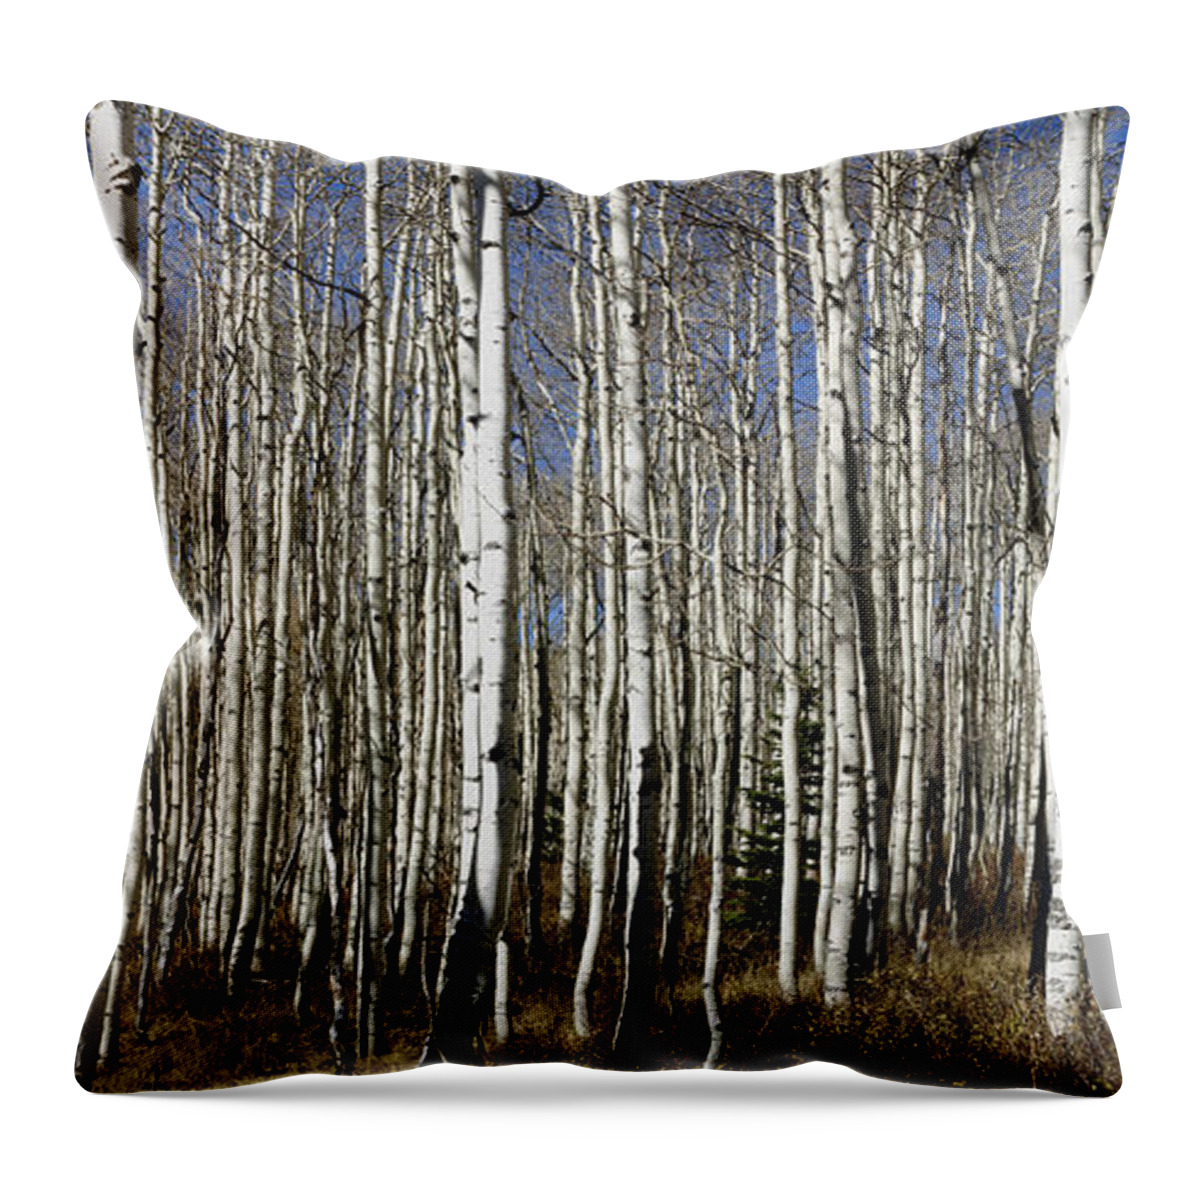 Quaking Aspens Throw Pillow featuring the photograph Fall Quaking Aspens Panorama by Richard Lynch